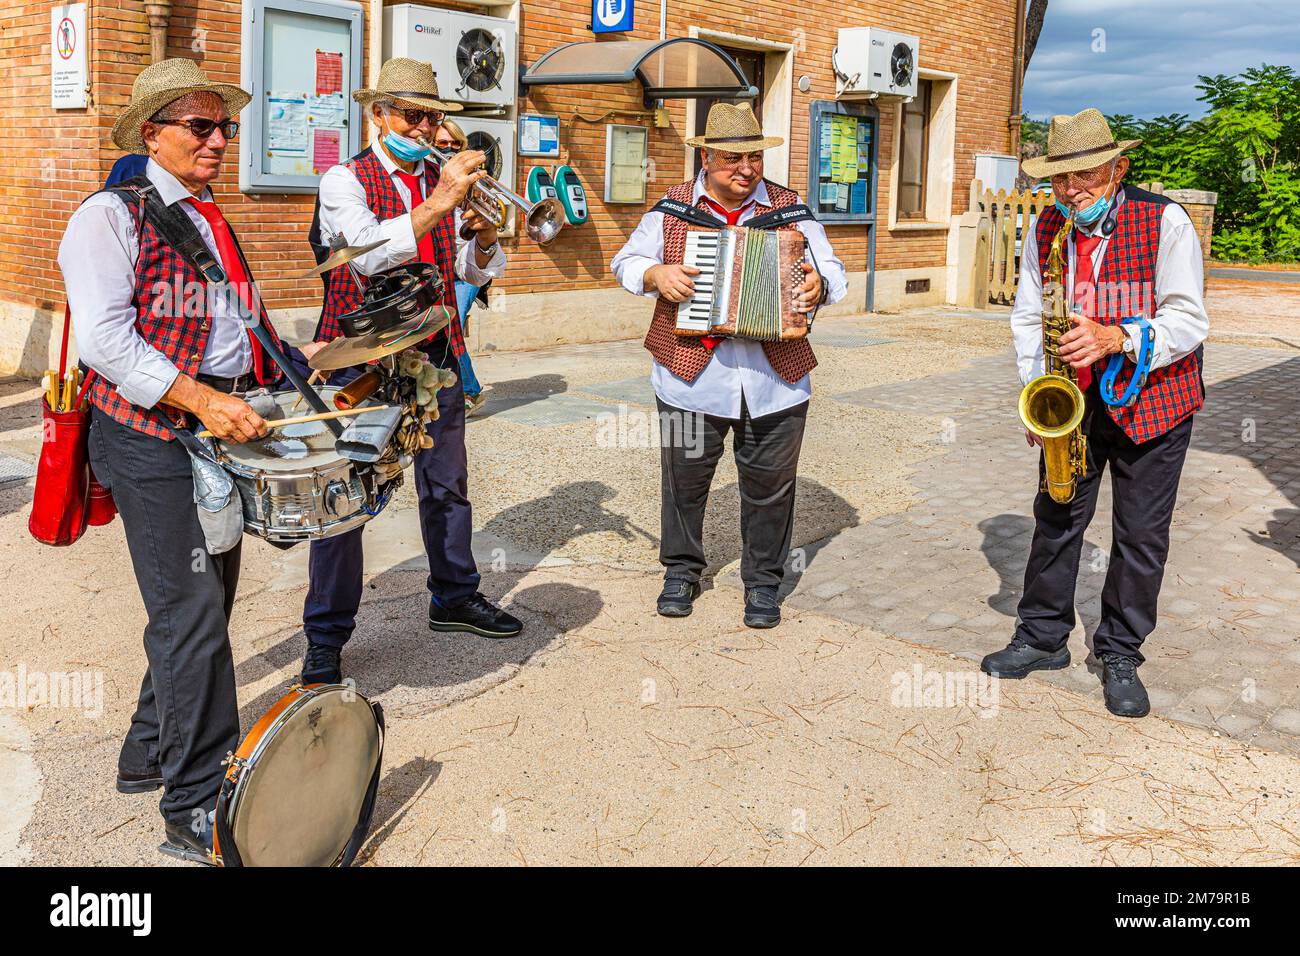 Music band plays to entertain the passengers of the historic steam railway Treno Natura, Monte Antico station, Val dOrcia, Tuscany, Italy Stock Photo